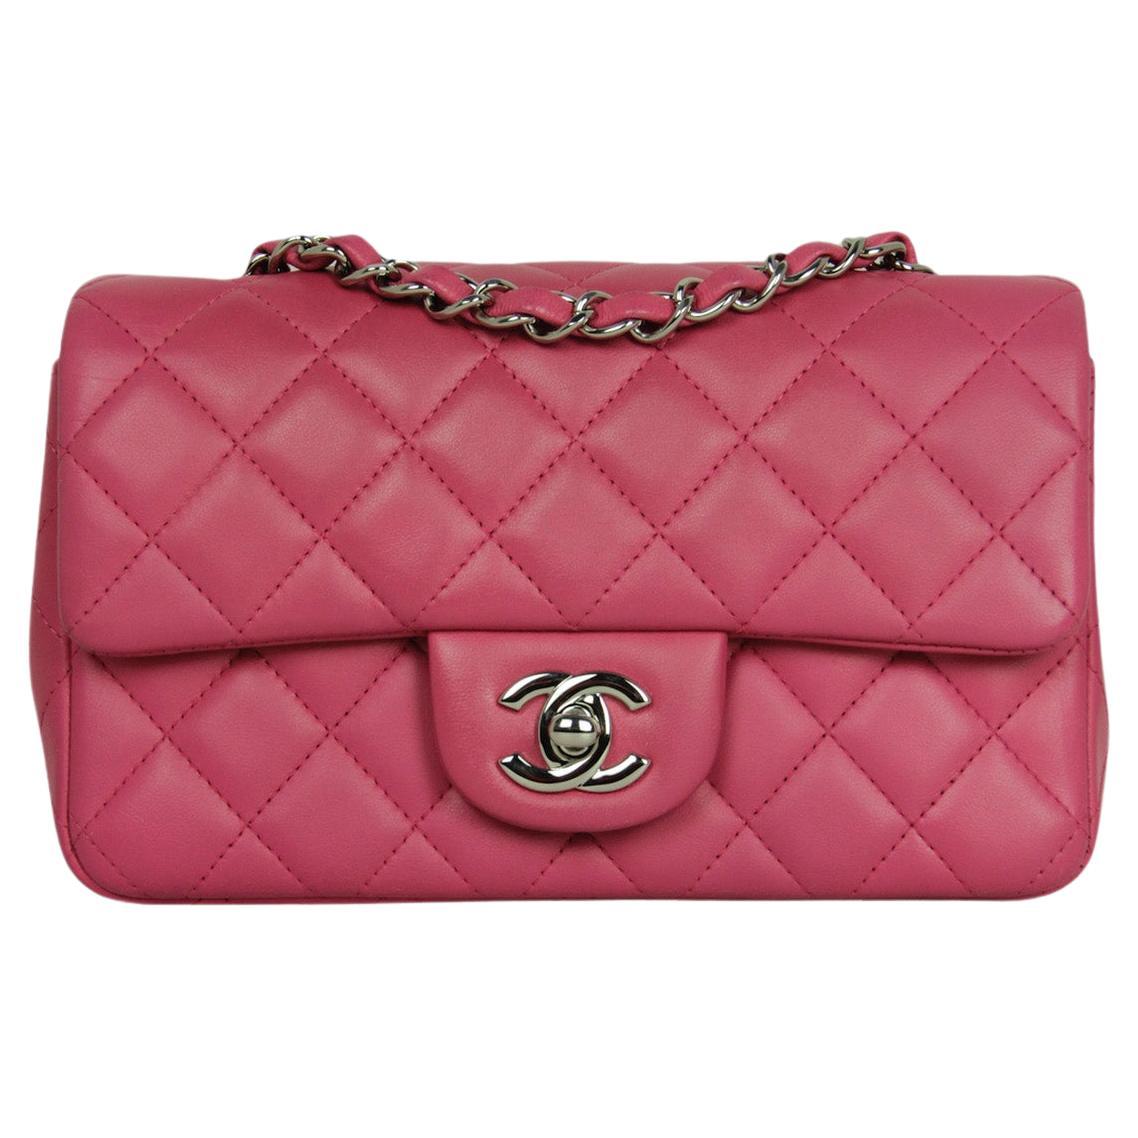 Chanel Pink Lambskin Leather Quilted Rectangular Mini Flap Bag For Sale